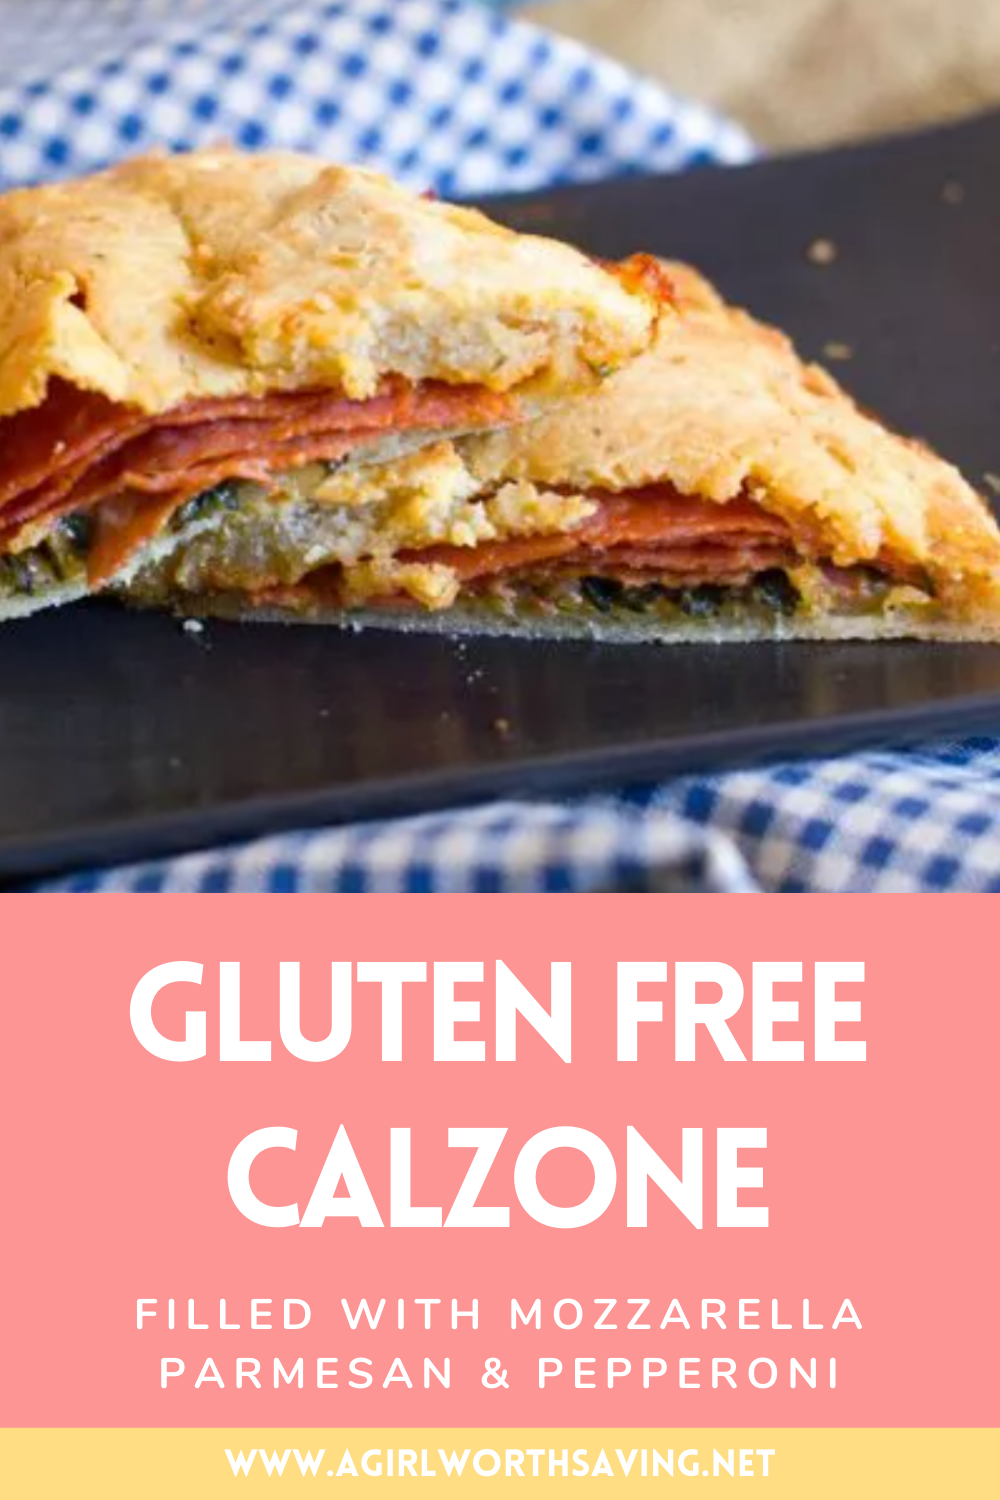 This easy gluten free calzone is loaded with melted mozzarella, Parmesan cheese and pepperoni! It's kid food that can be made to suit your tastes!